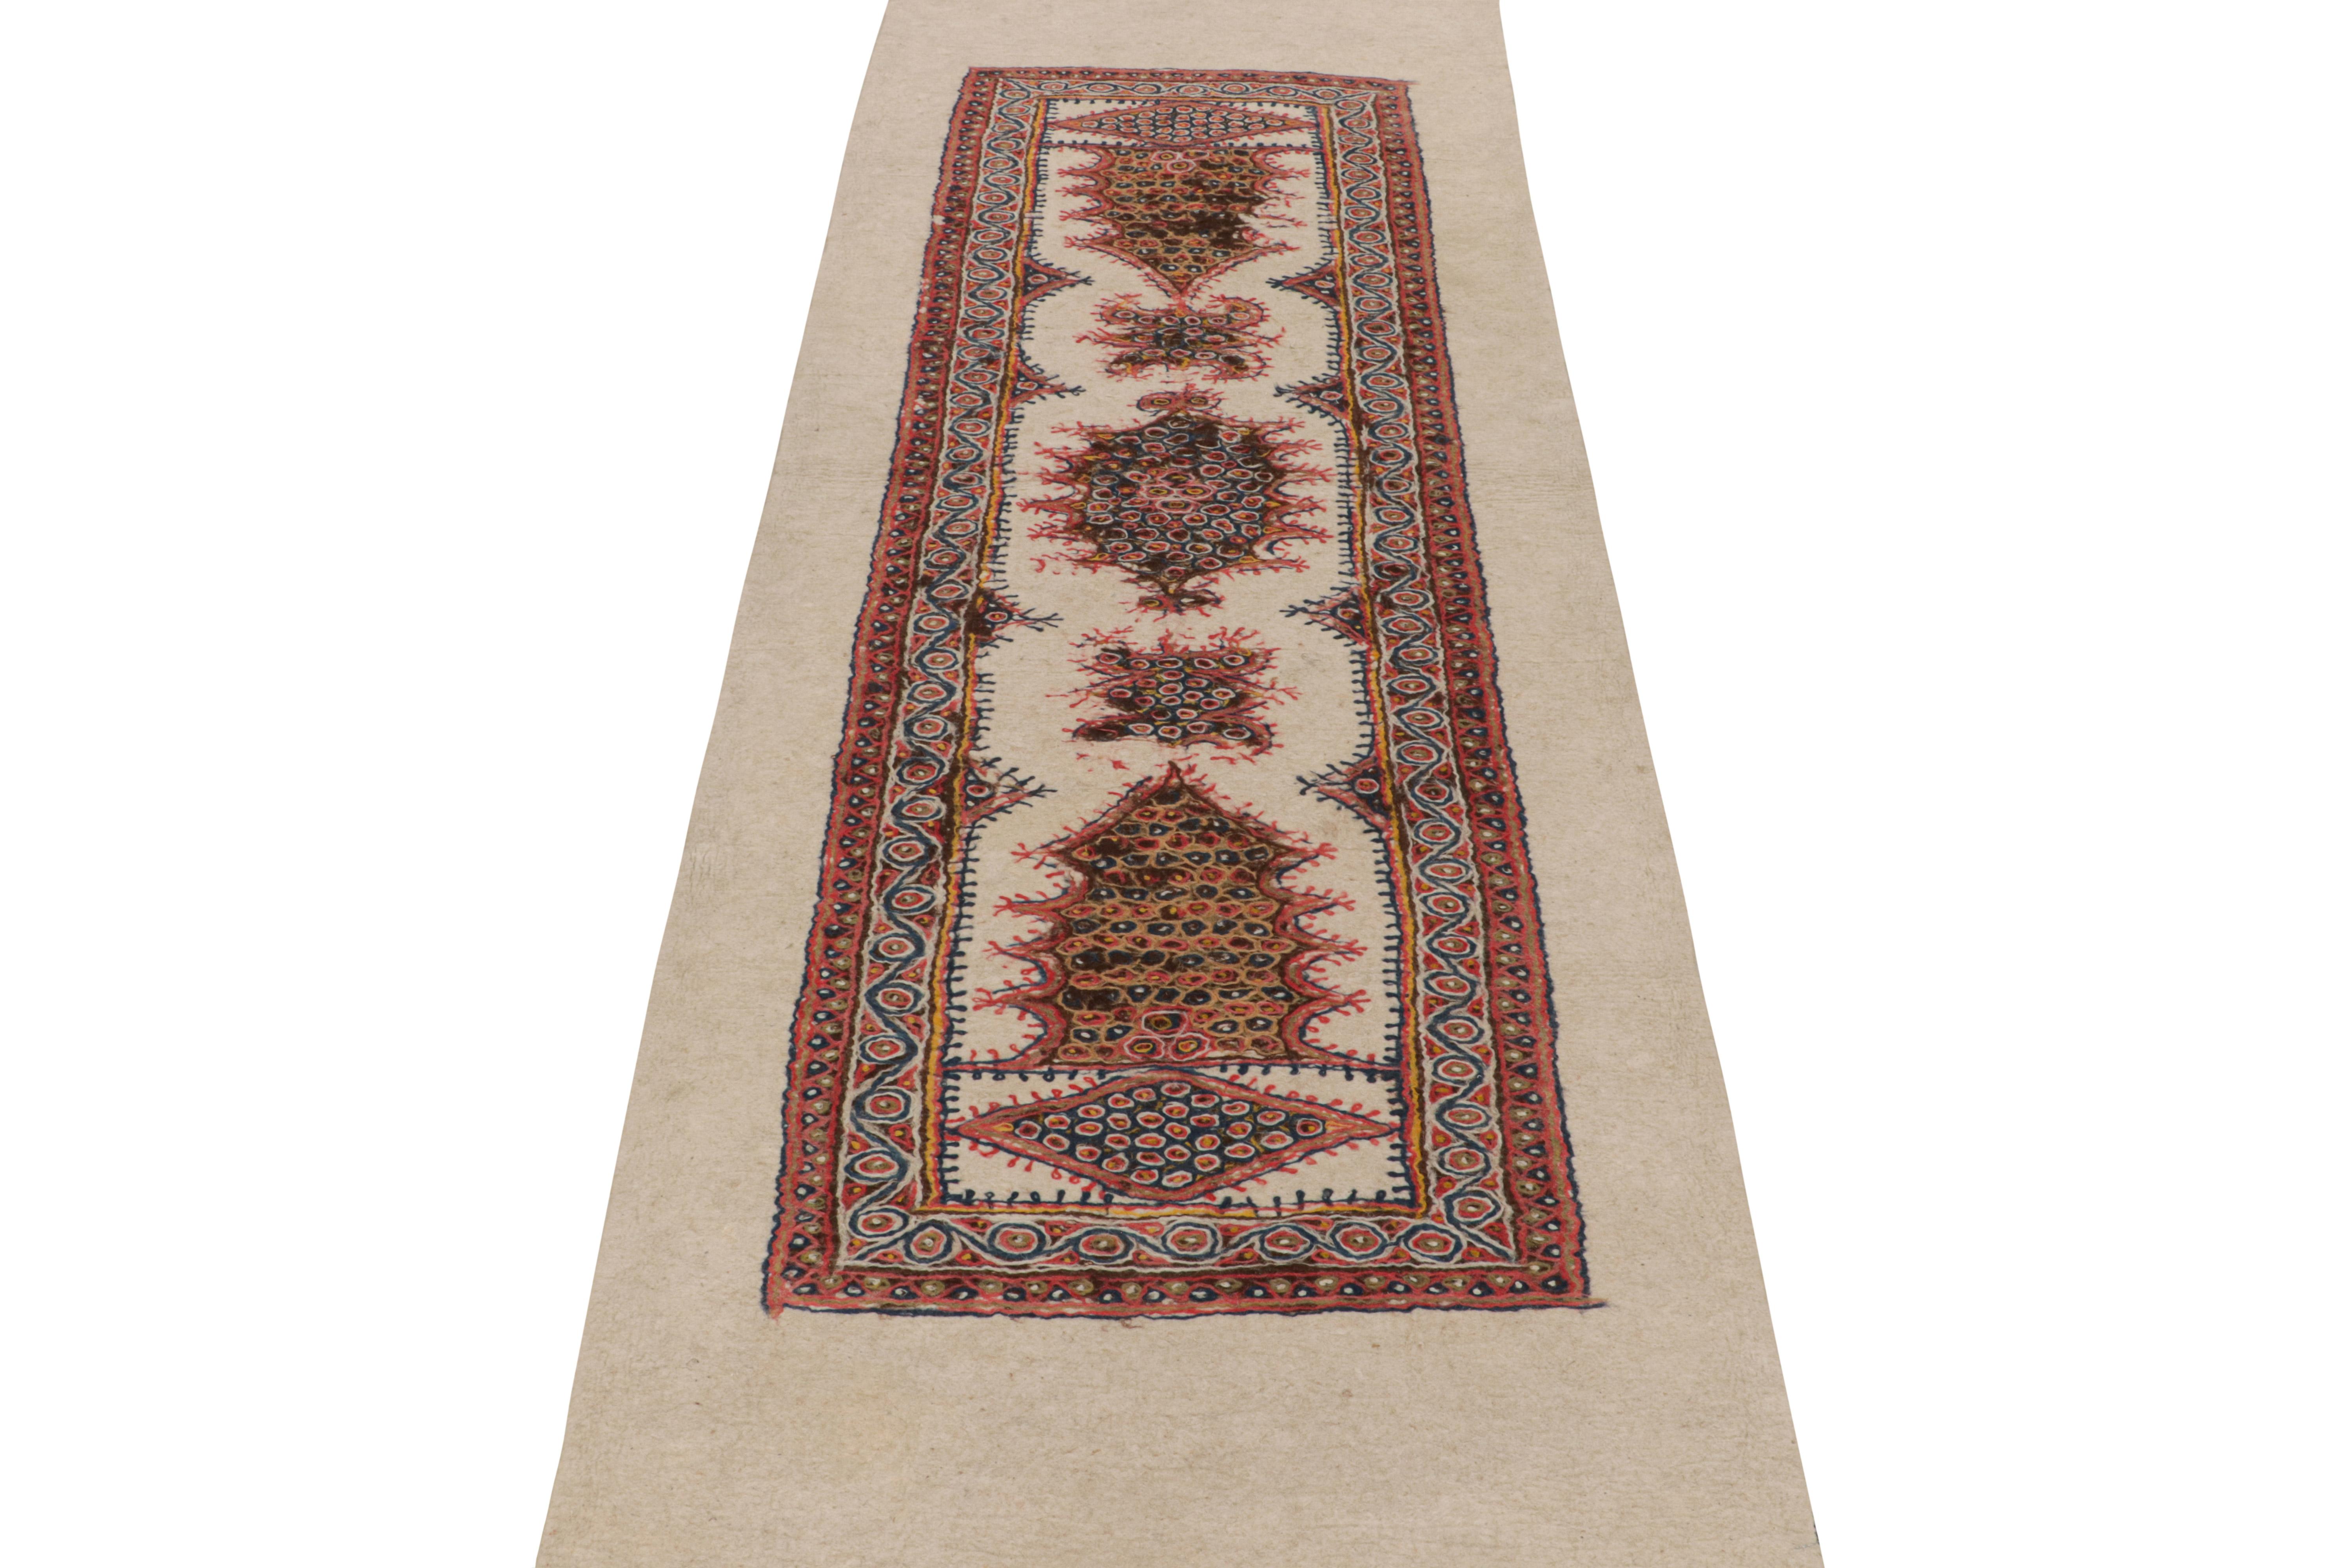 Vintage Felted Persian Kilim with Geometric Patterns on Beige, by Rug & Kilim In Good Condition For Sale In Long Island City, NY